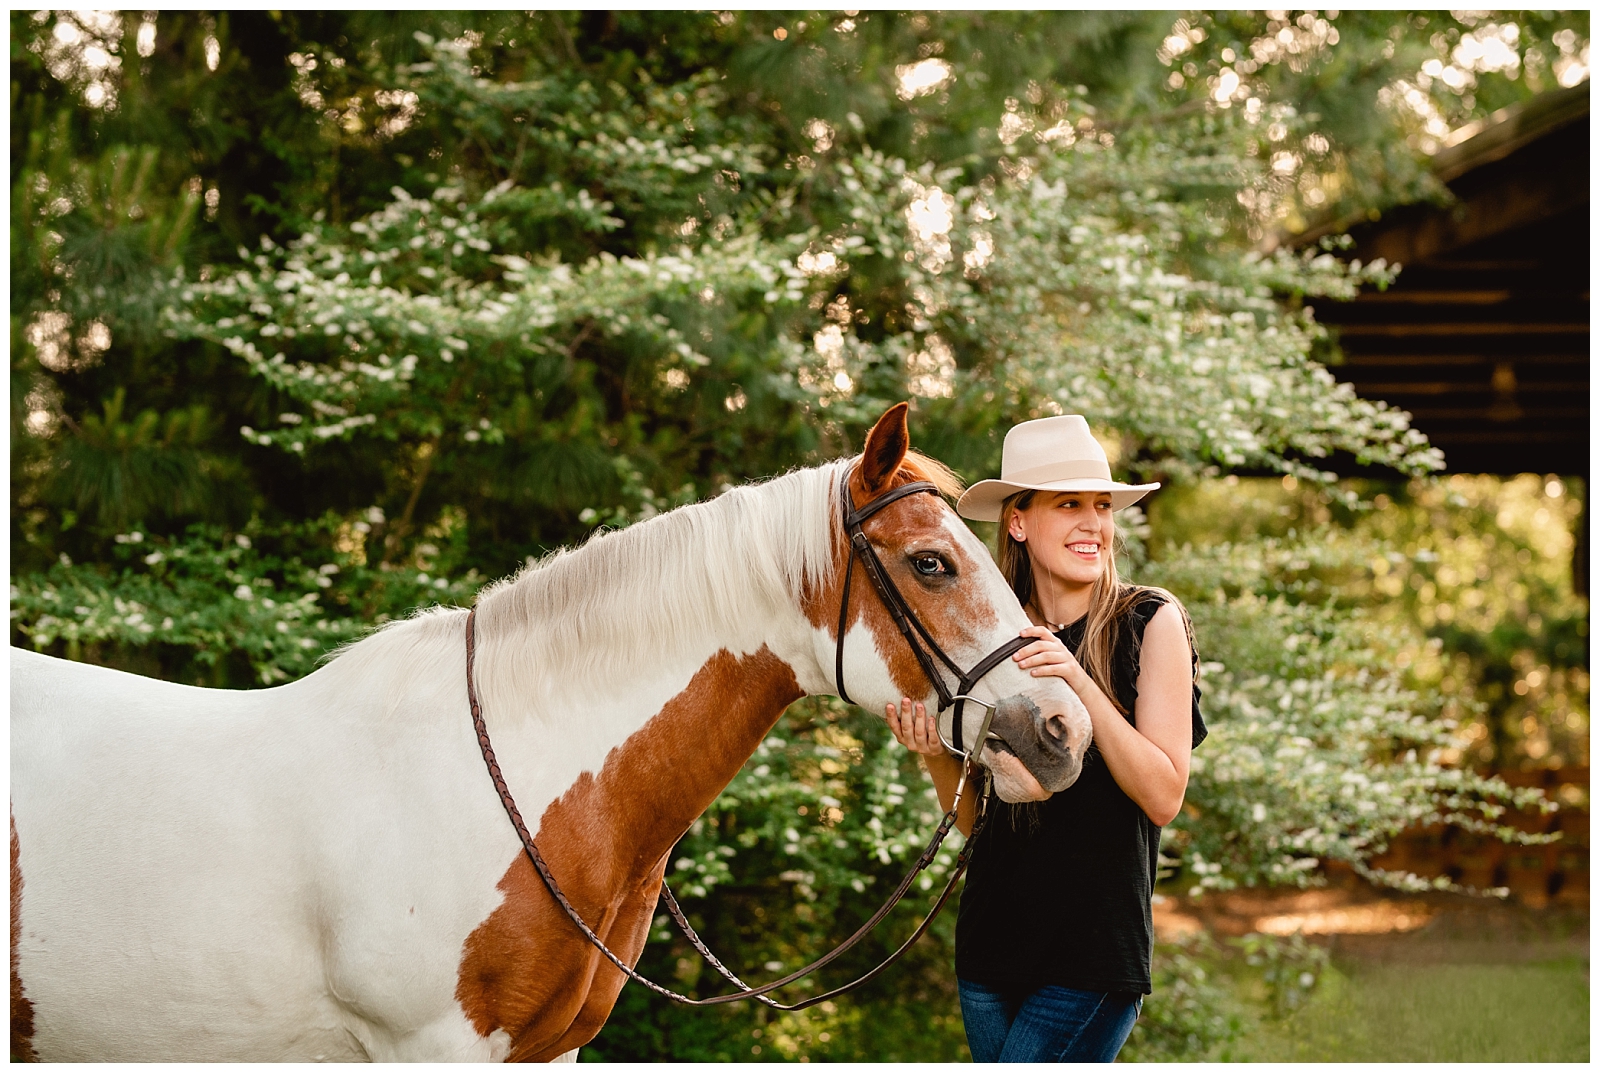 Thomasville Senior Photographer. Hands and Hearts for Horses, Thomasville Georgia. Shelly Williams Photography.